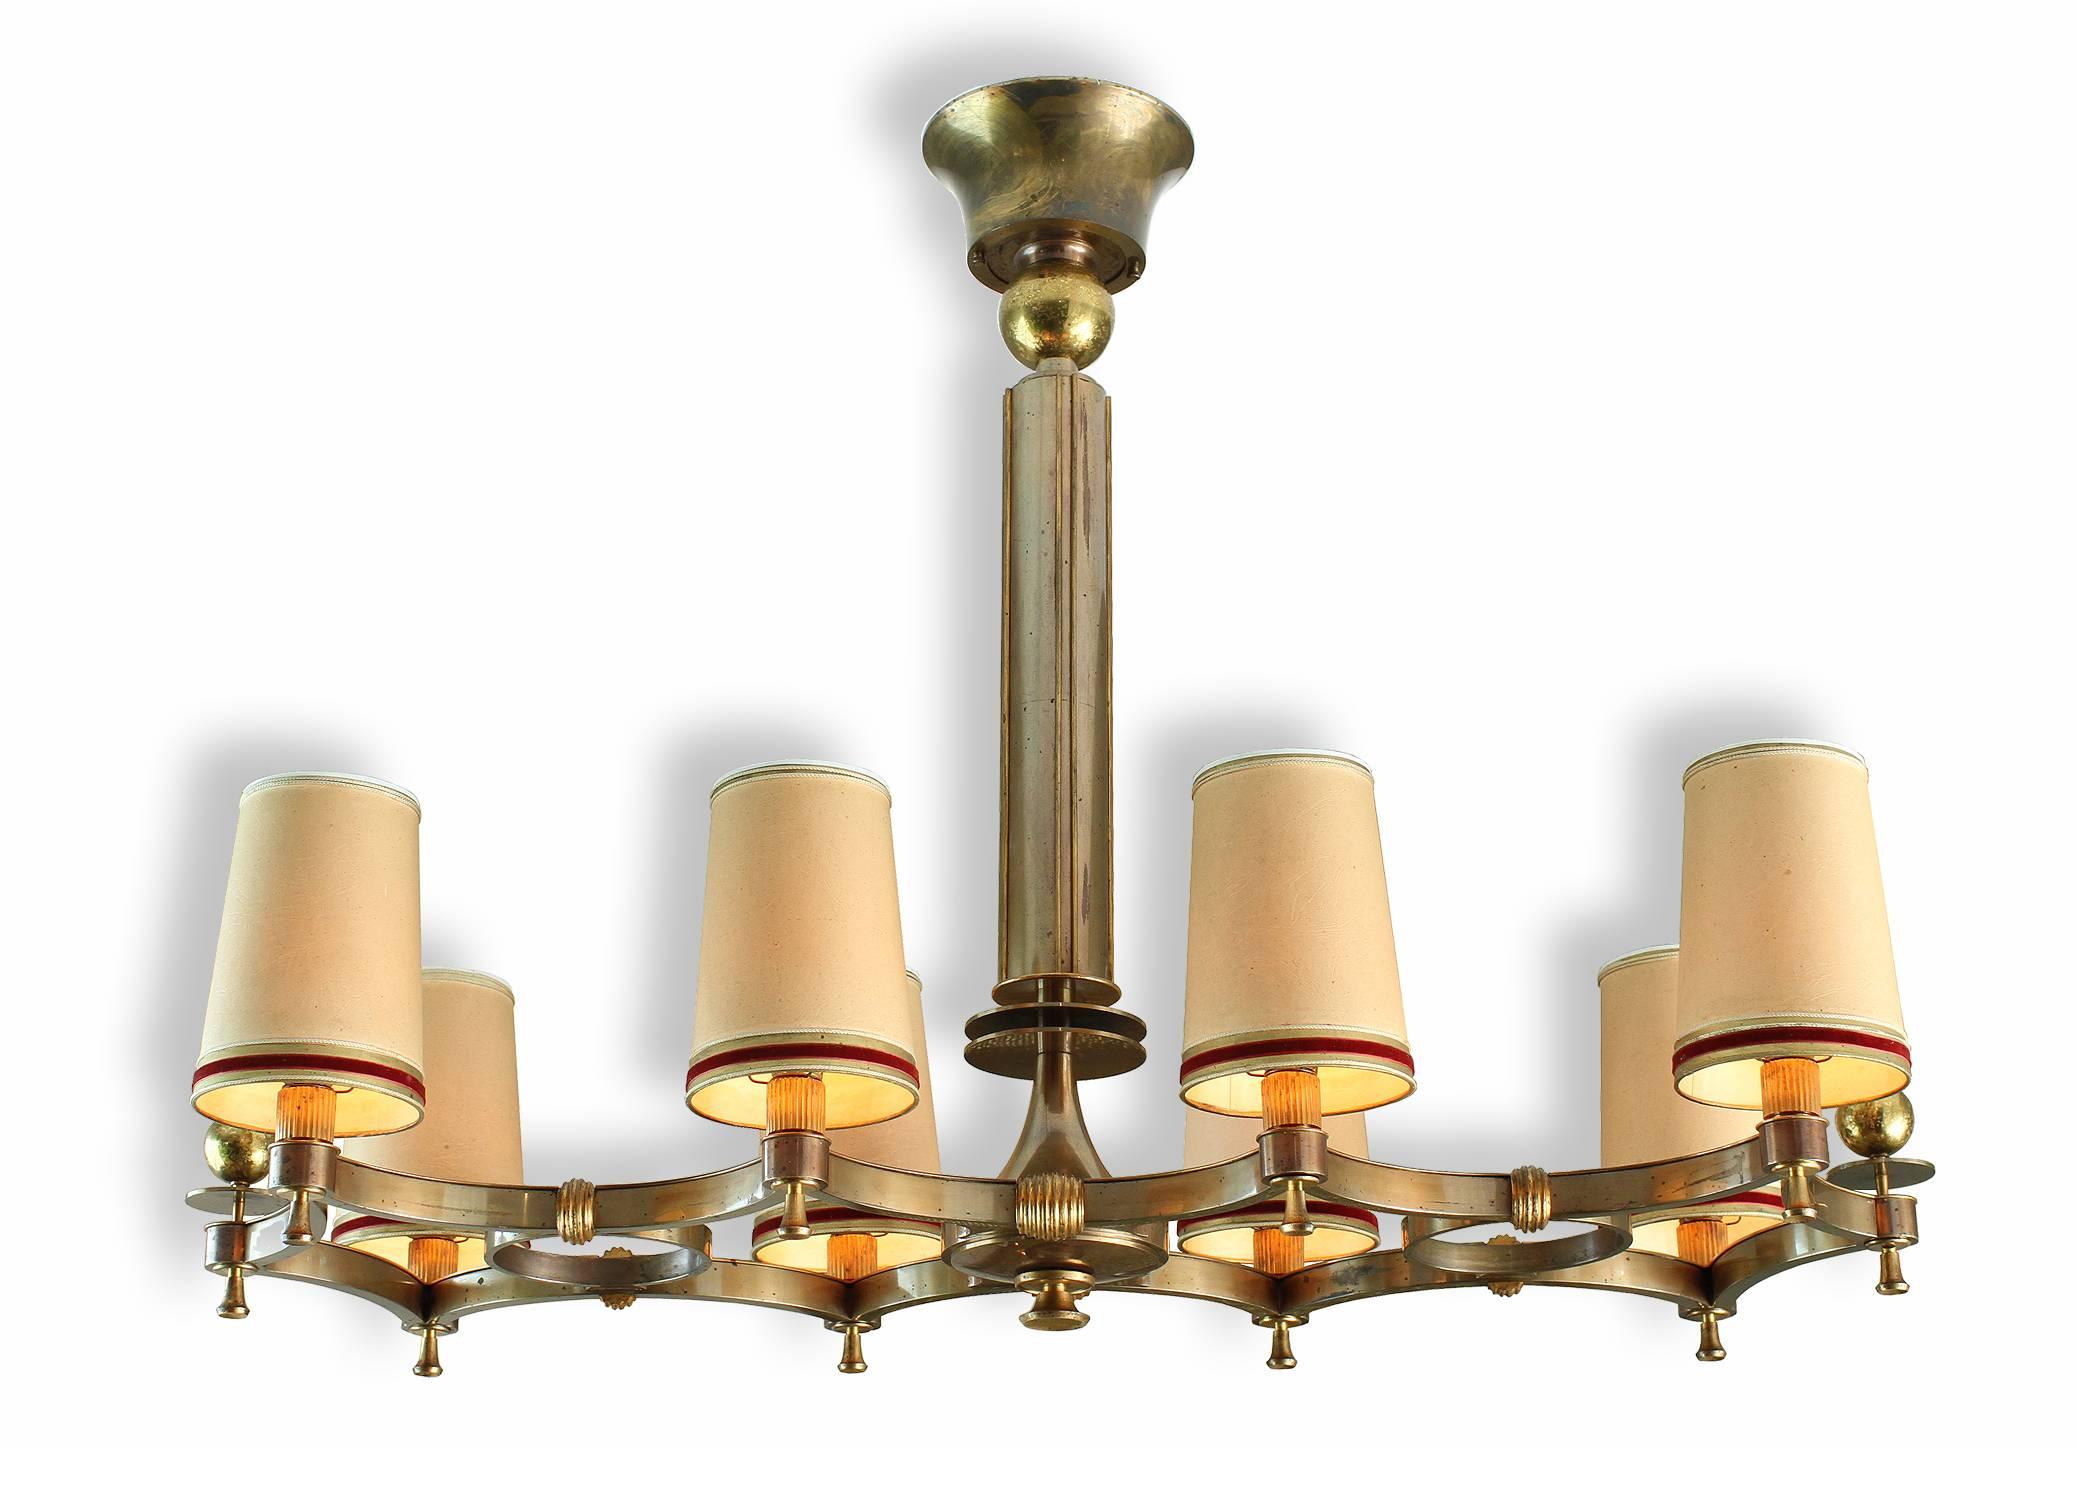 Maxime Old (1910-1991).

Exceptional and probably one-of-a-kind bronze eight-light chandelier with eight arms diffusing lights through original lampshades.

Two tones of brass and patinated bronze lightly oxidized, make this chandelier a perfect